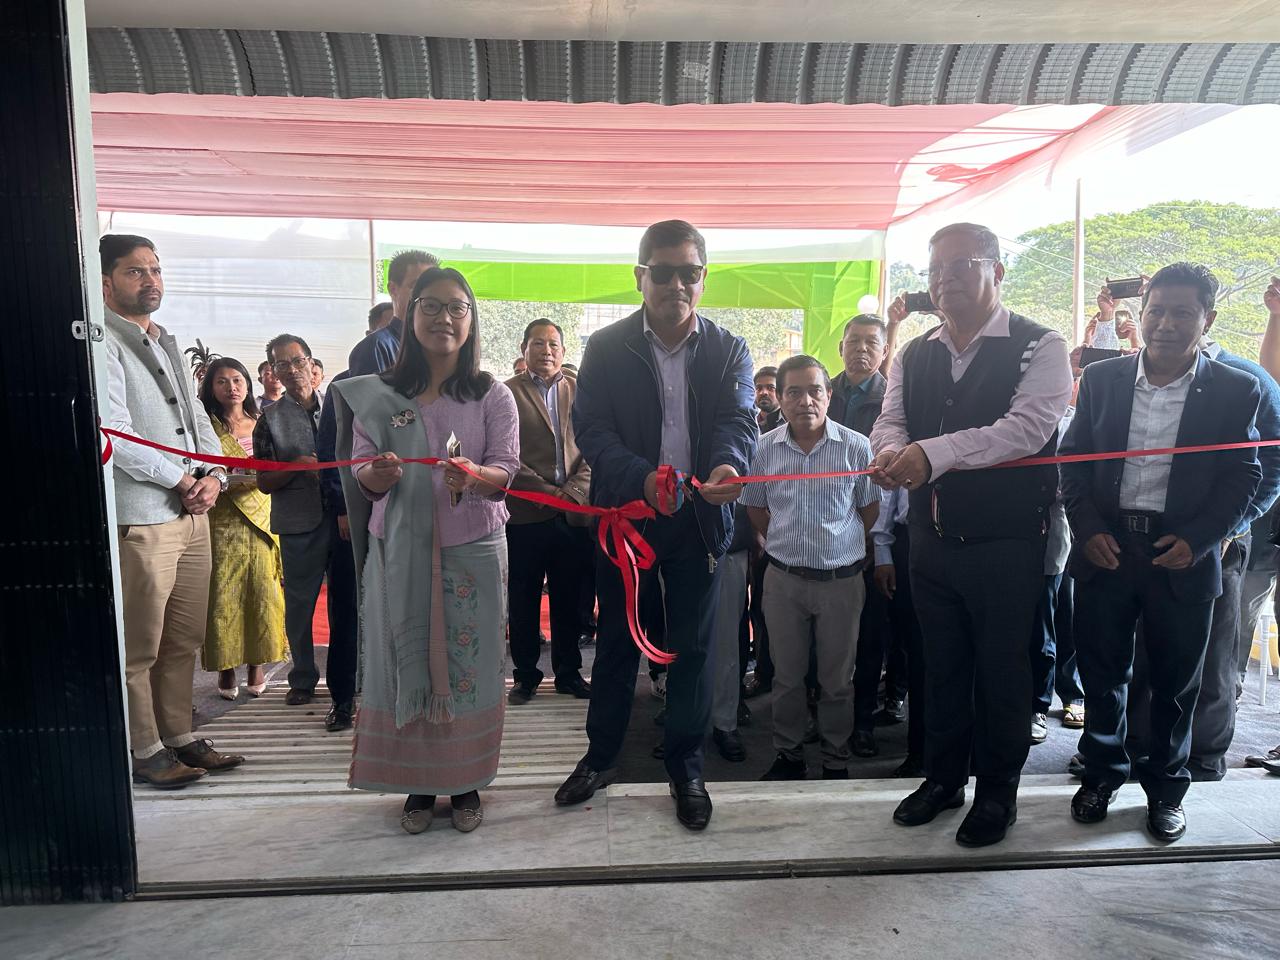 Conrad opens mega shopping complex for Tura’s largest weekly market Nazing Bazar